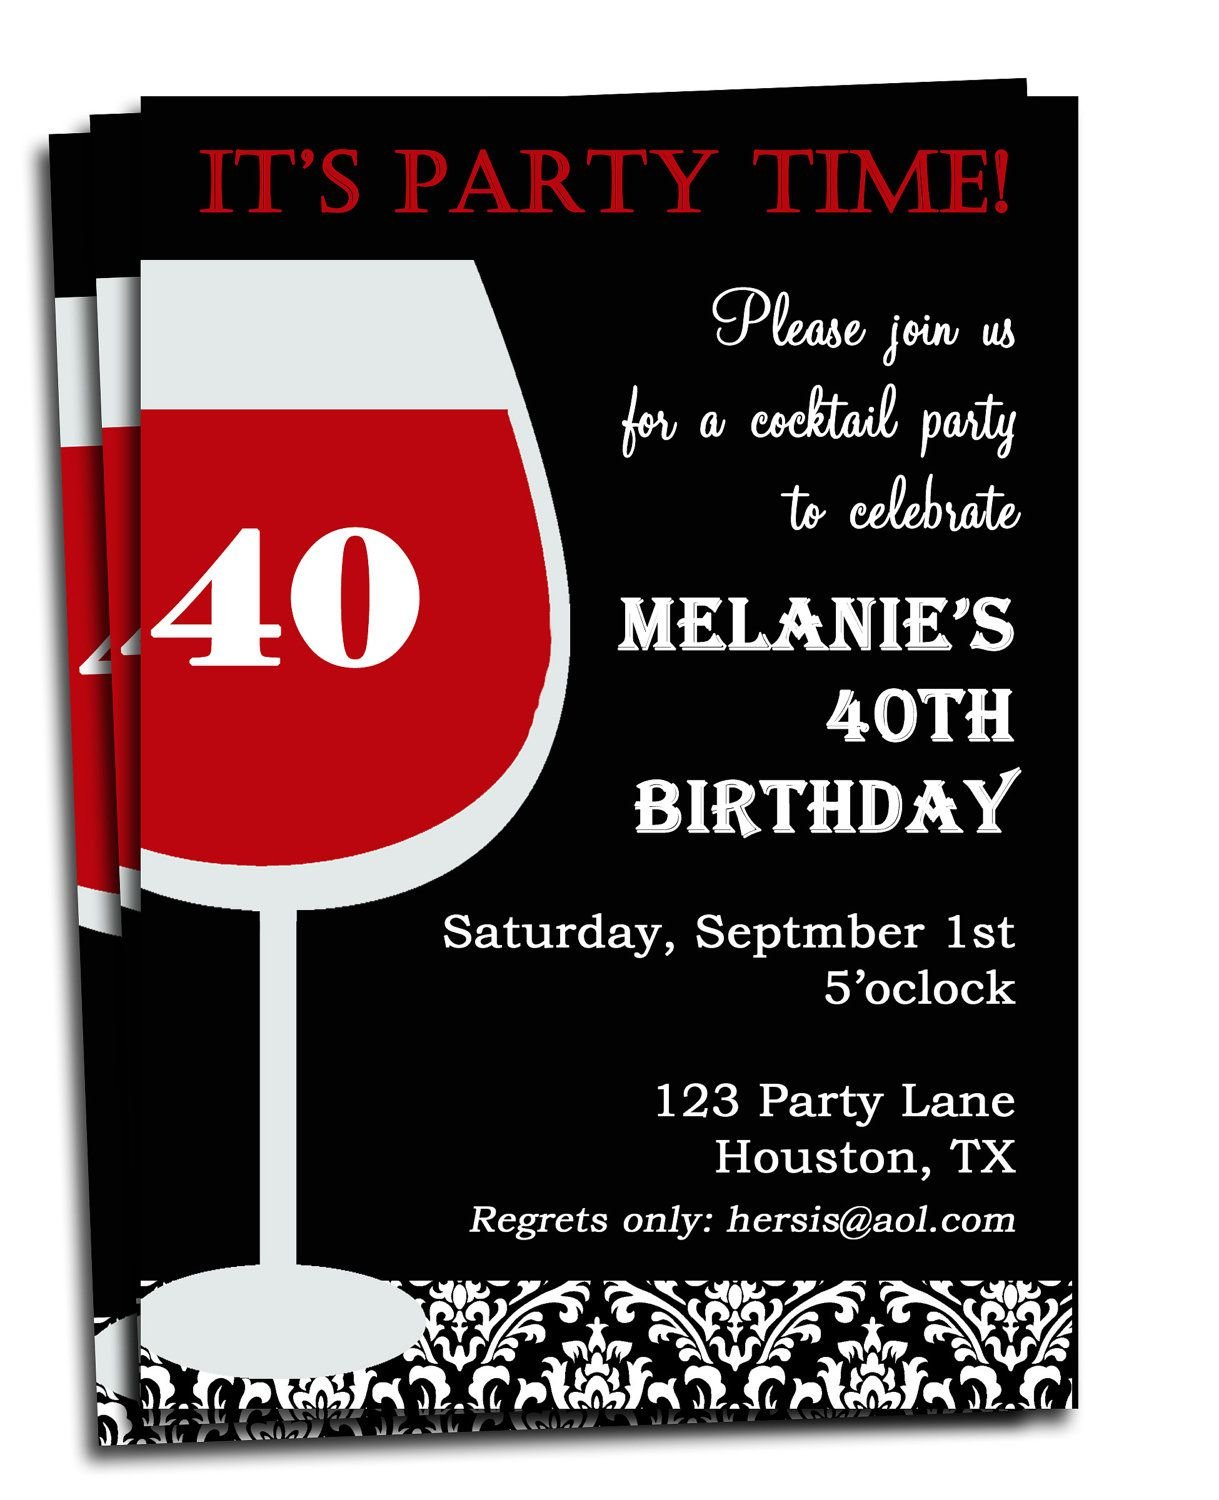 Funny Birthday Invites For Adults   Funny Birthday Invites For